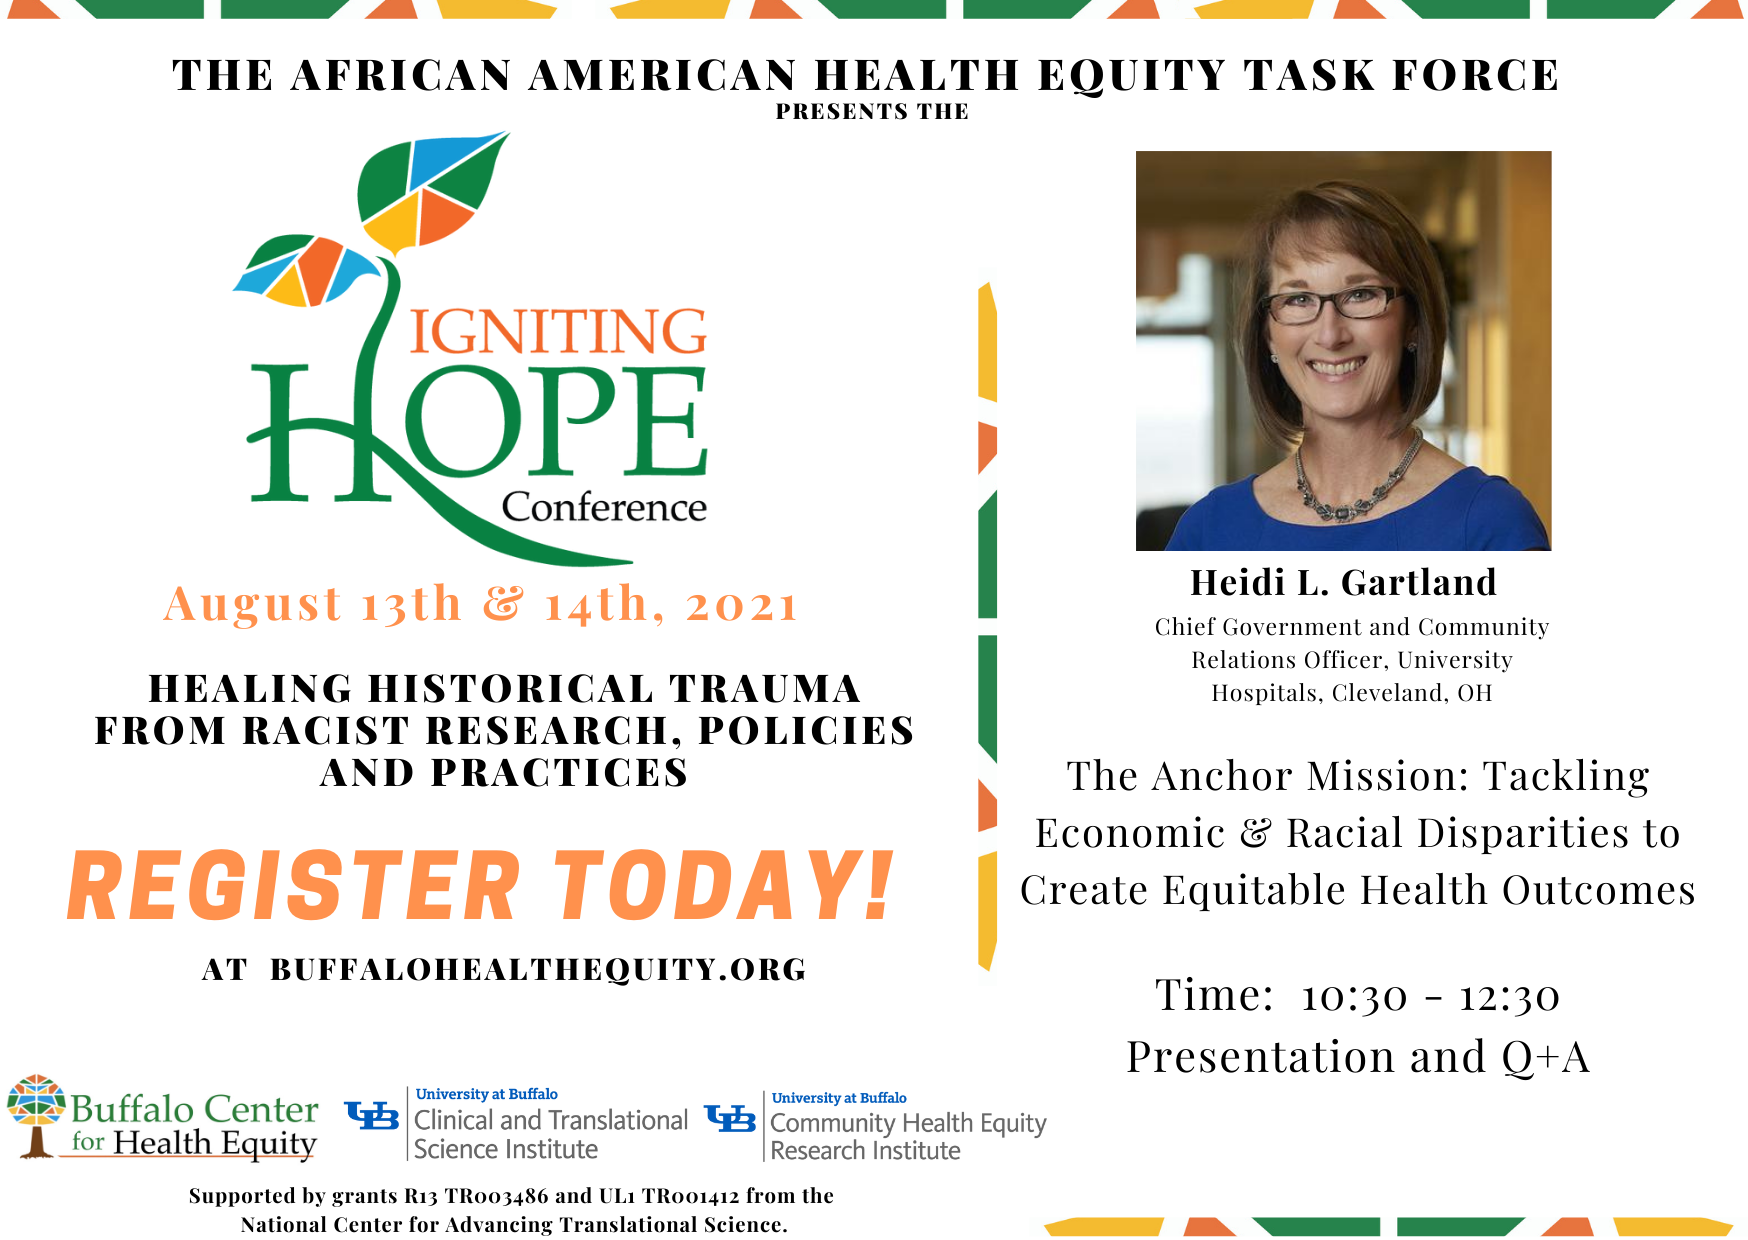 Heidi Igniting Hope Save the Date Final.png